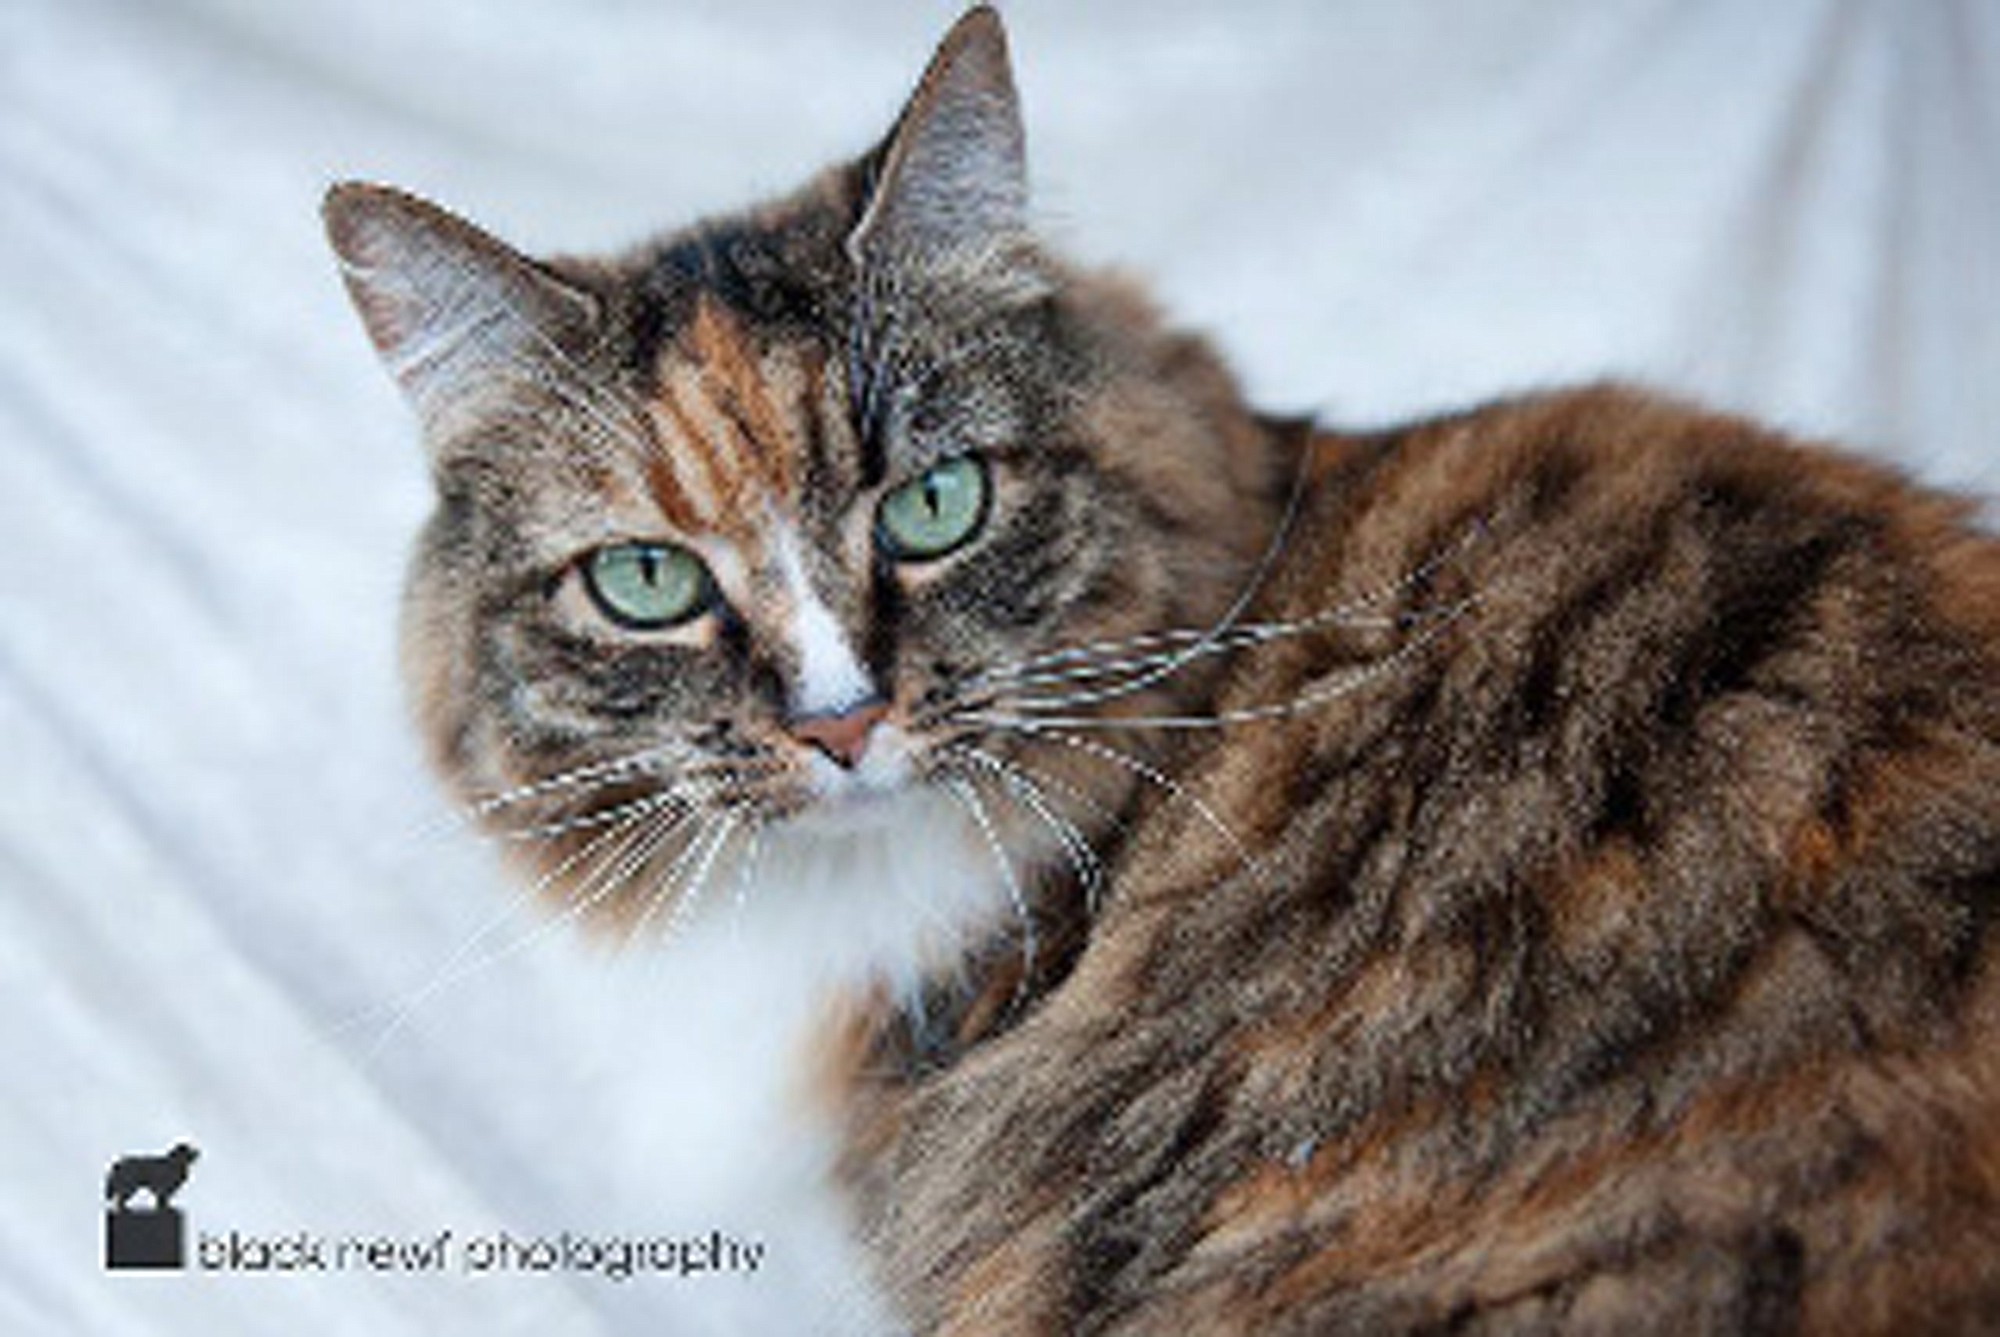 Megan, who came to the shelter after her previous owner had medical issues, is a 6-year-old long-haired female calico. She is playful, gentle and loves to be brushed. She enjoys a quiet home with a window ledge, so she can watch birds.